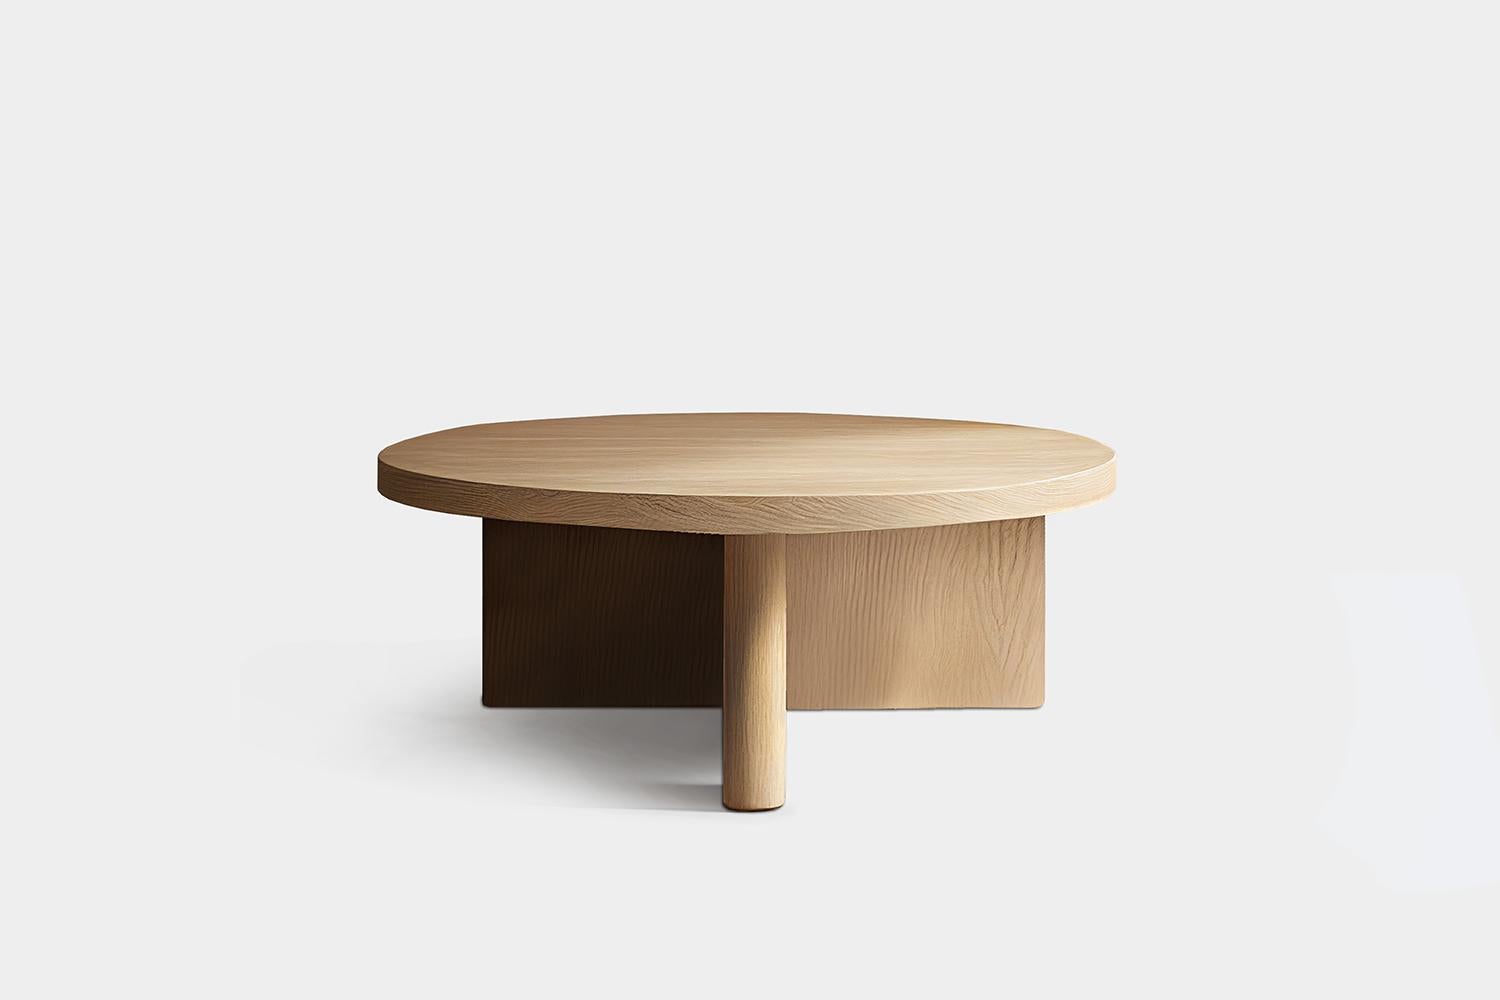 Brutalist Cruciform Solid Wood Round Table By NONO For Sale